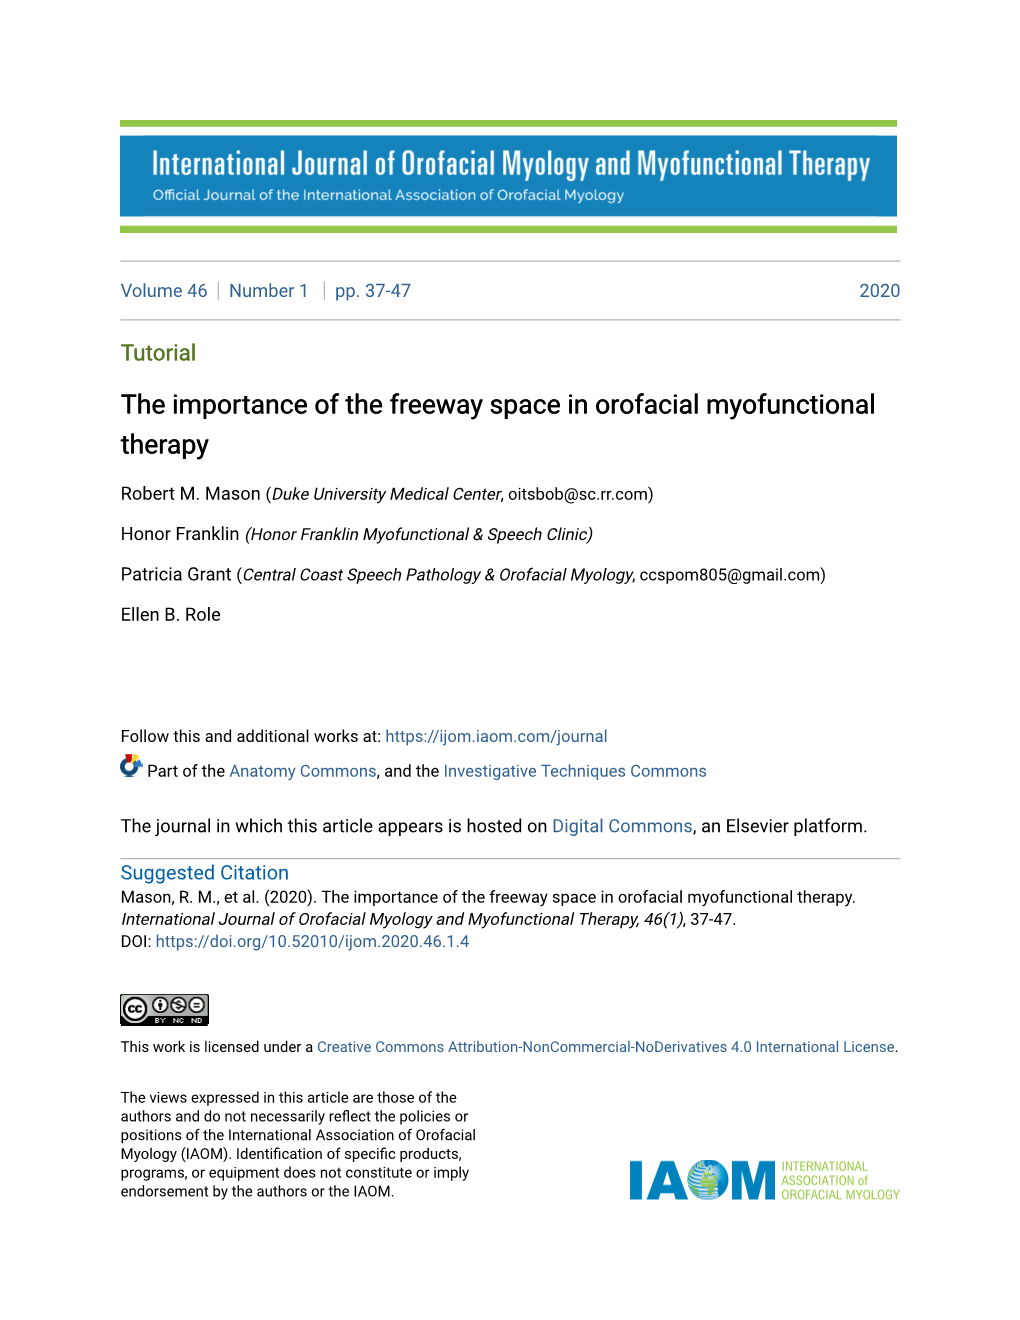 The Importance of the Freeway Space in Orofacial Myofunctional Therapy